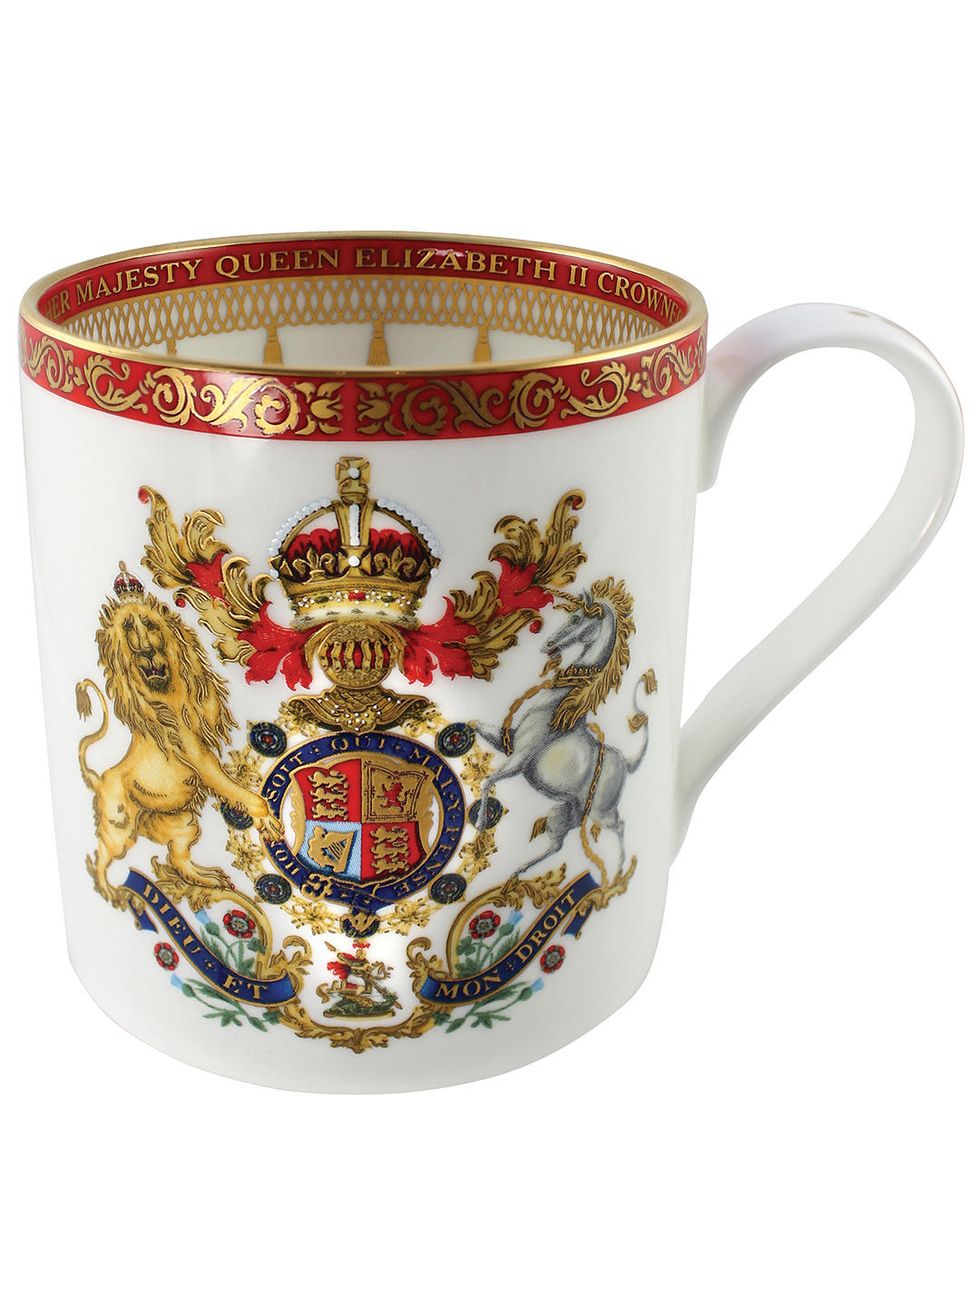 Royal Collection gifts